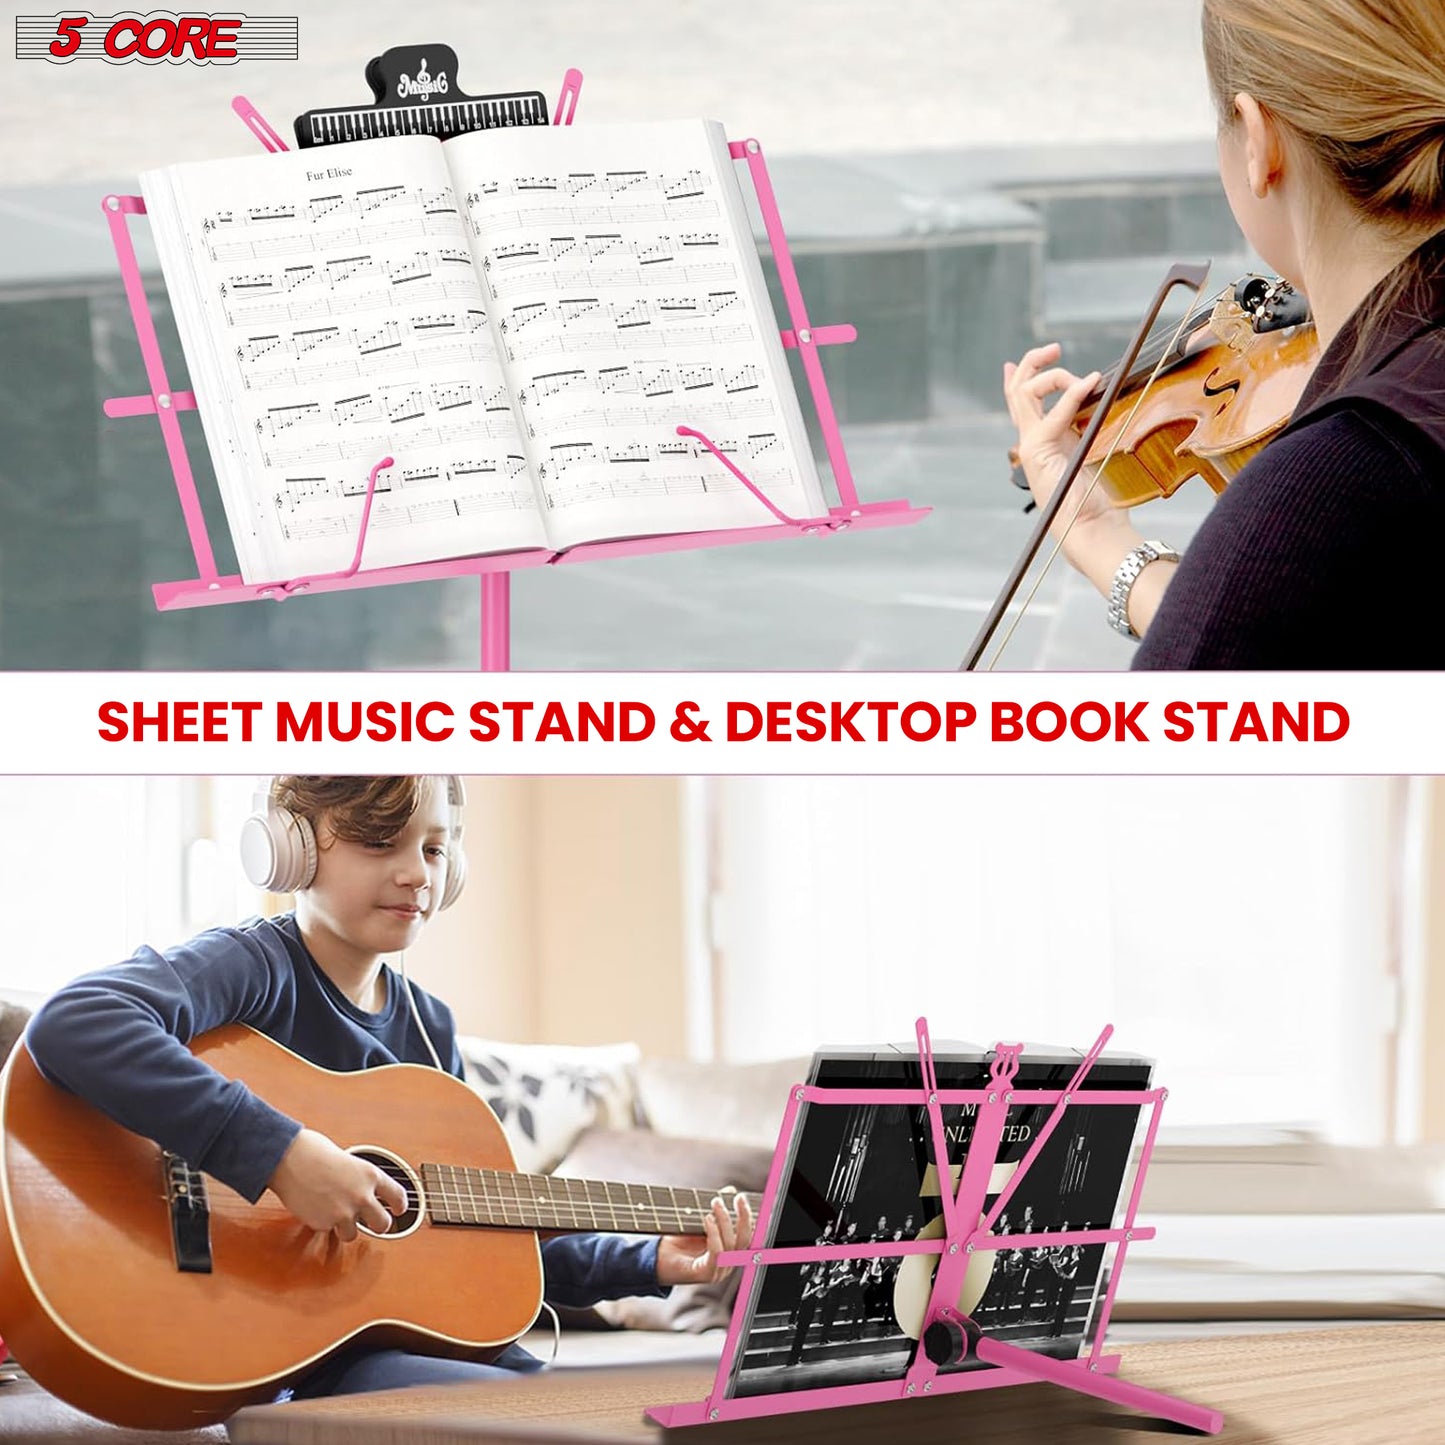 5 Core Music Stand, 2 in 1 Dual-Use Adjustable Folding Sheet Stand Pink / Metal Build Portable Sheet Holder / Carrying Bag, Music Clip and Stand Light Included - MUS FLD PNK